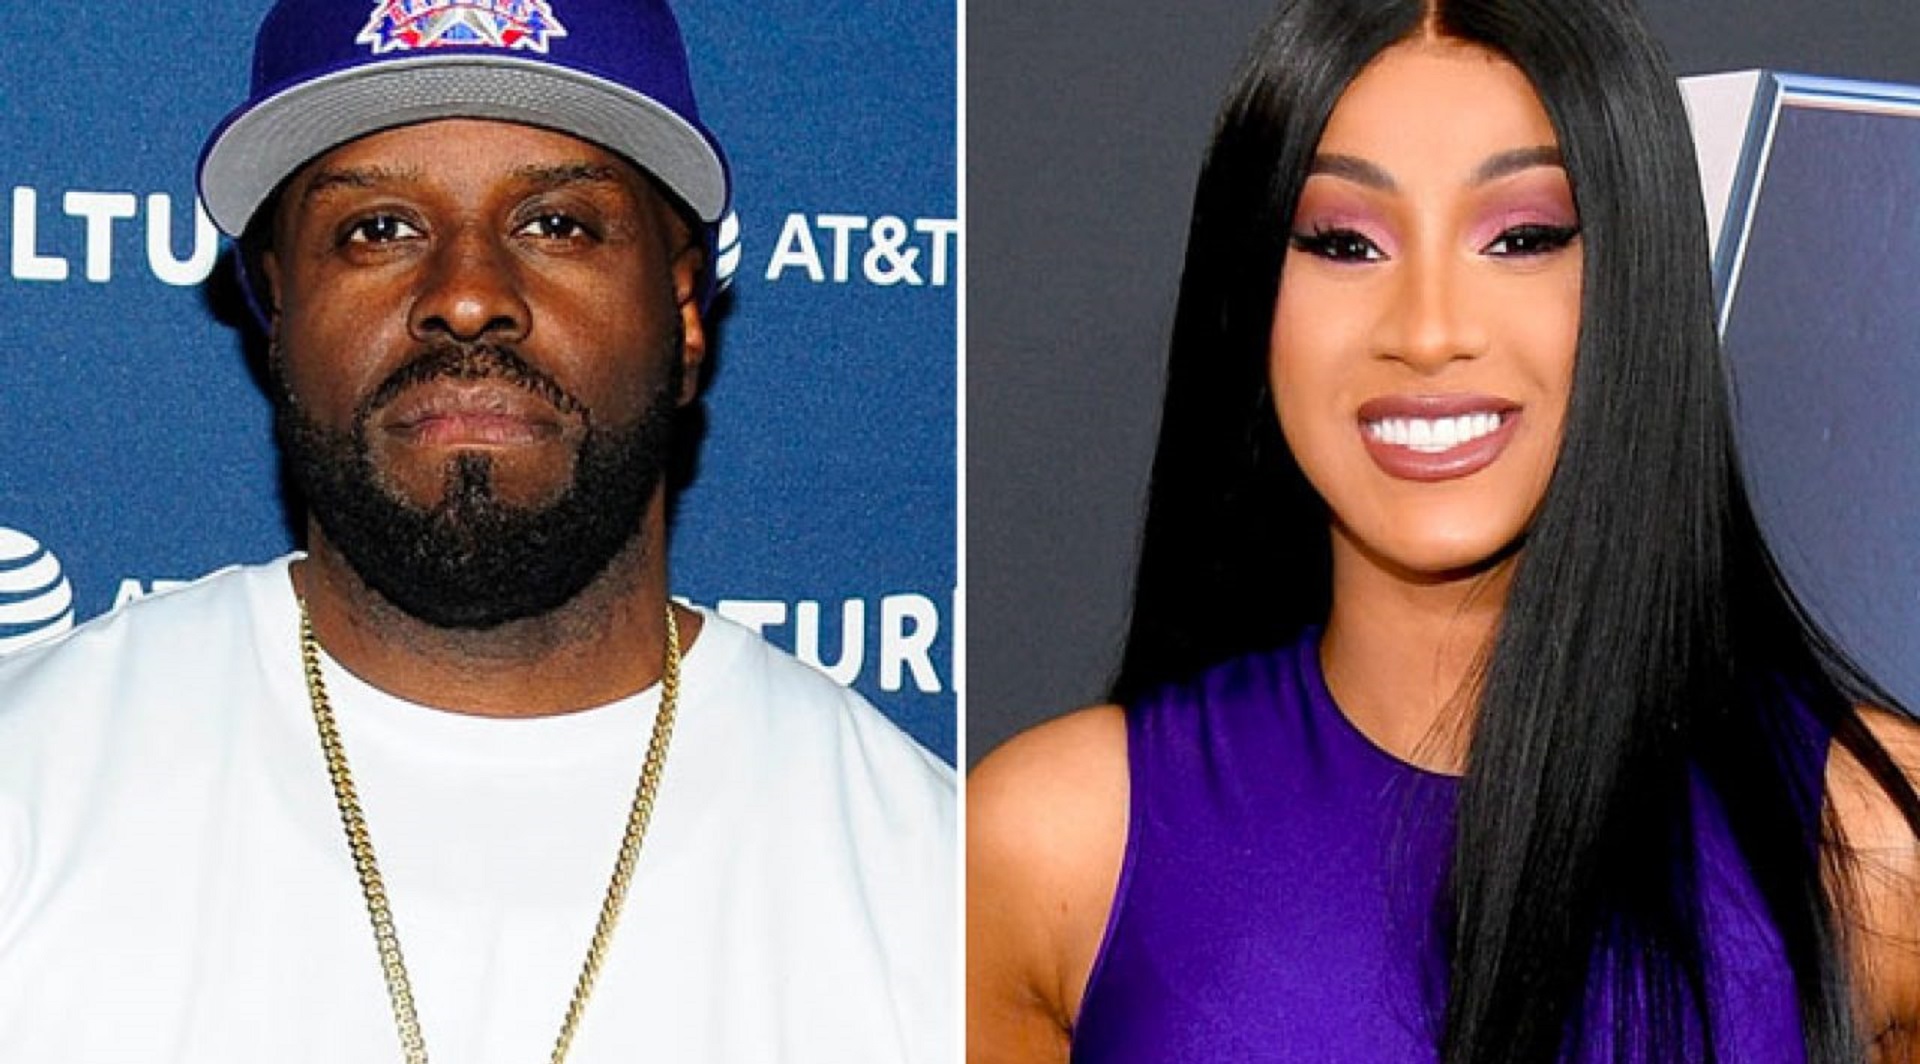 DJ Funkmaster Says Cardi B Is a ‘Terrible Rapper’, Gets Dragged By Her Fans Online…